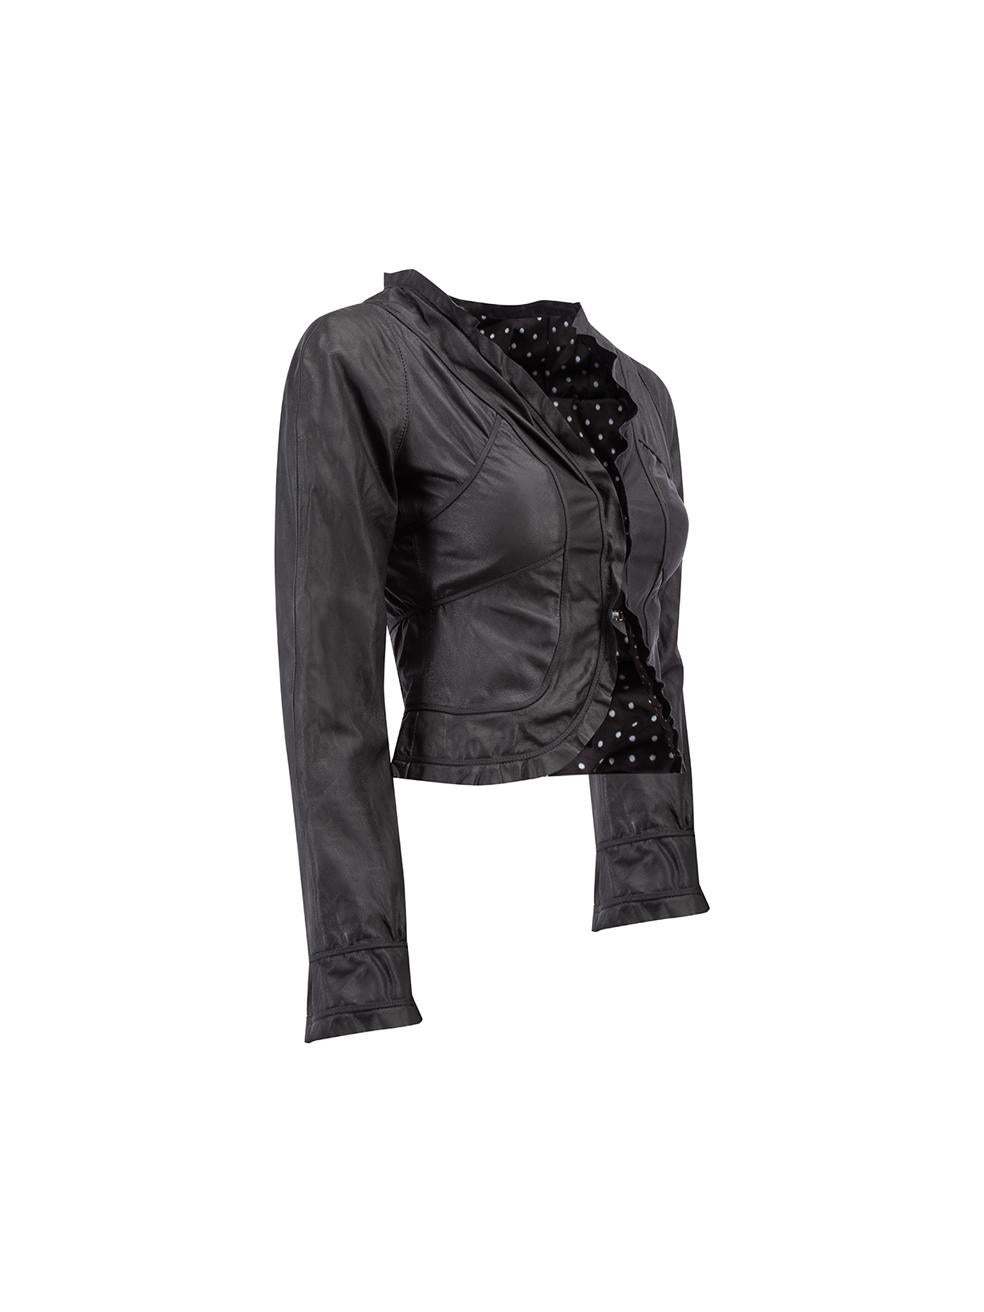 CONDITION is Very good. Minimal wear to jacket is evident. Overall wear to the outer leather fabric on this used Emporio Armani designer resale item. 



Details


Black

Leather

Fitted jacket

Ruffles accent

Front hook and eye closure





Made